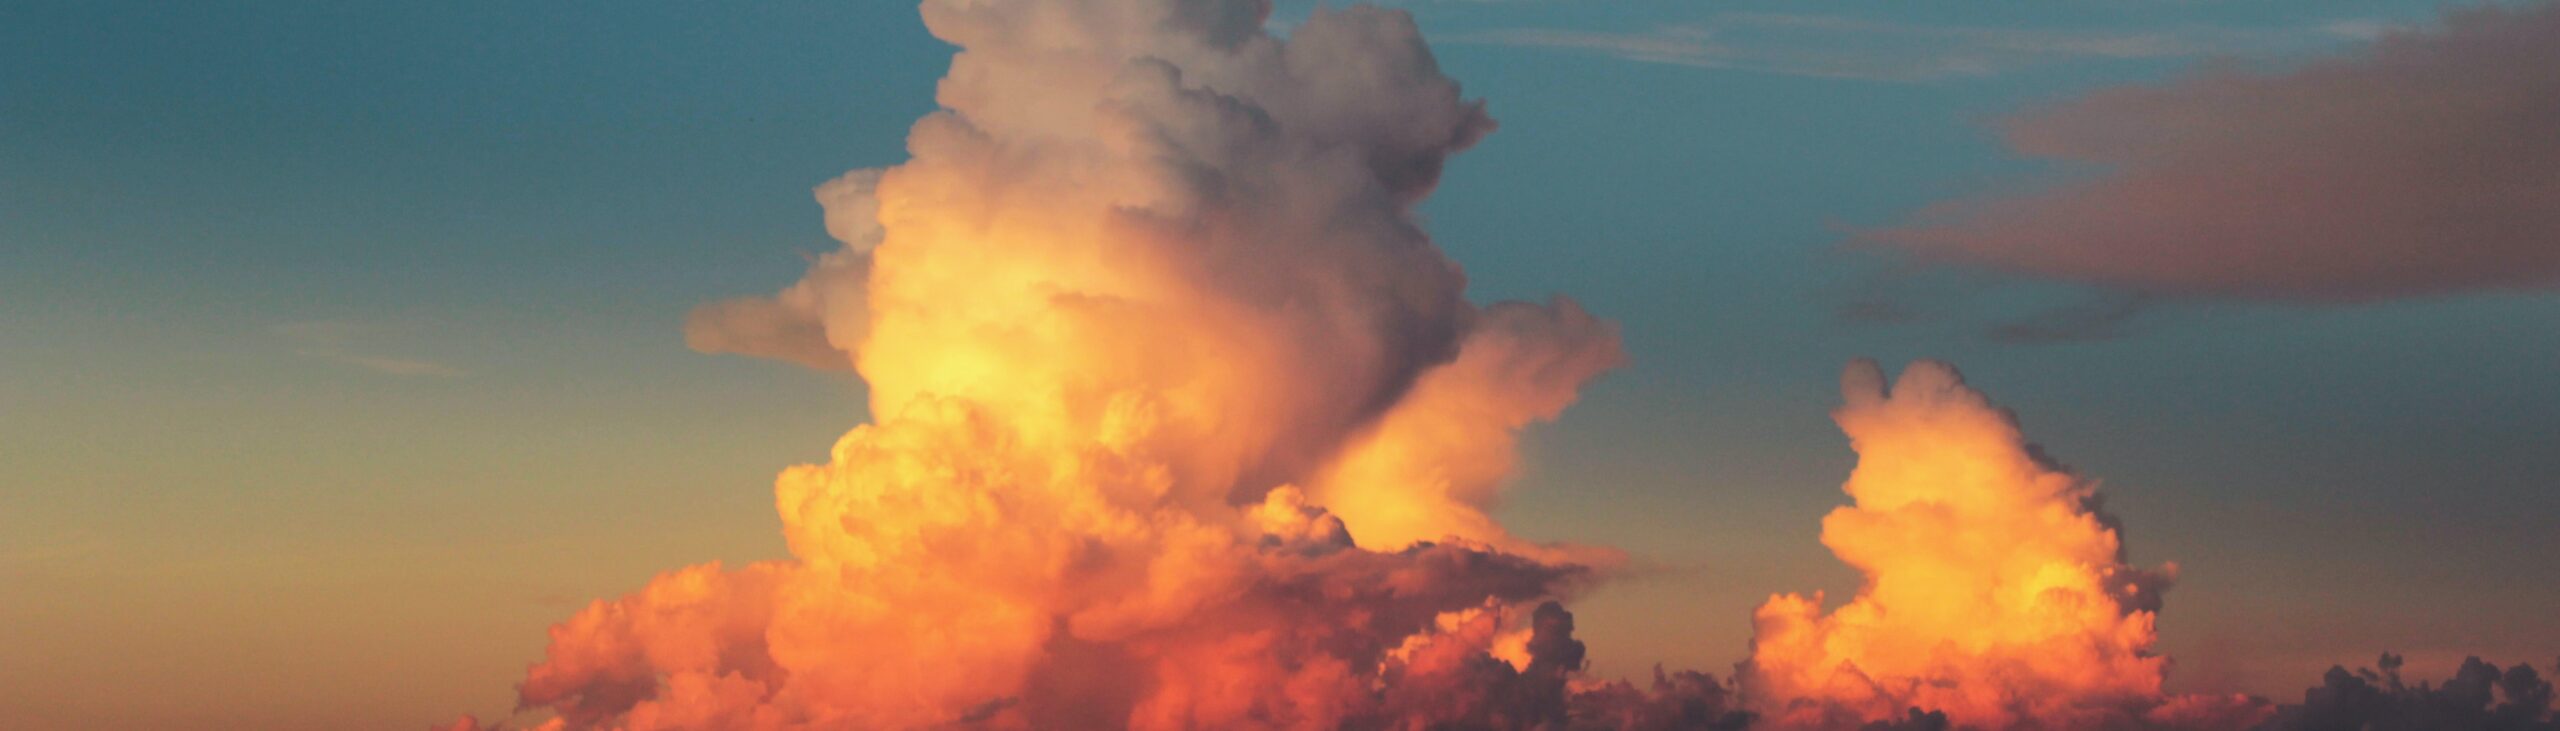 A photo of large clouds at sunset, the sky and clouds coloured orange, white, pink and blue